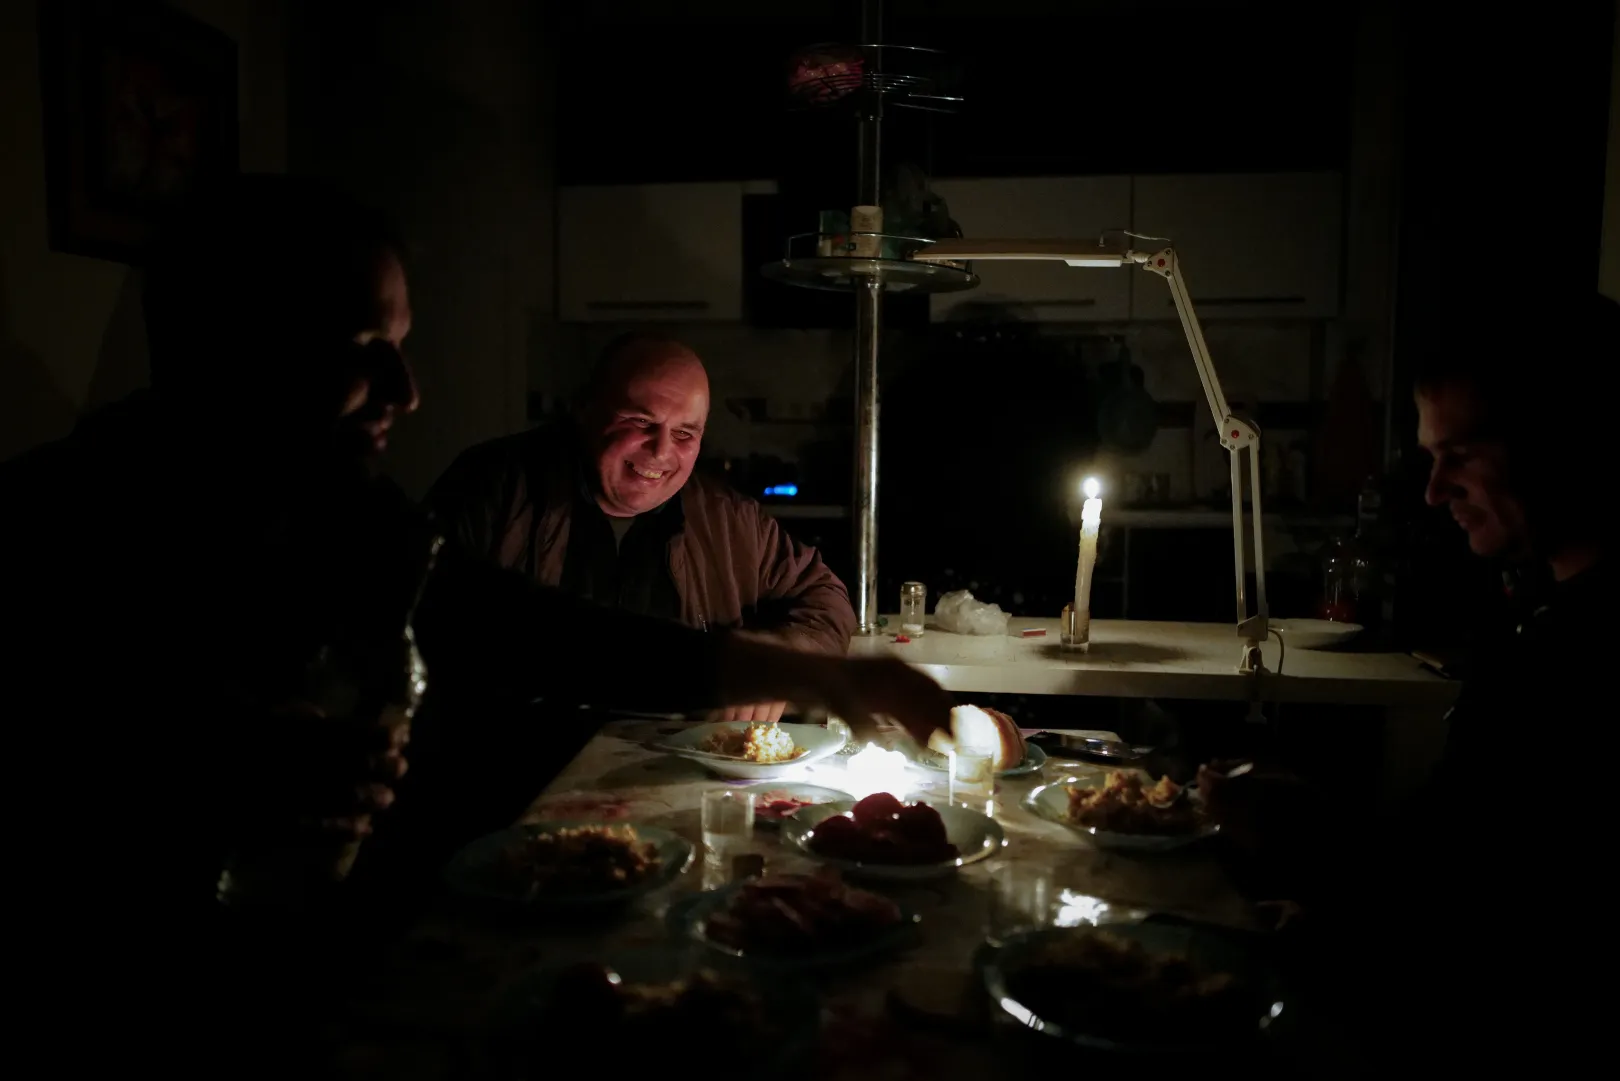 A candlelit dinner during a power outage. Dmitri, the vegetable farmer has been survining on his savings for months – Photo: István Huszti / Telex